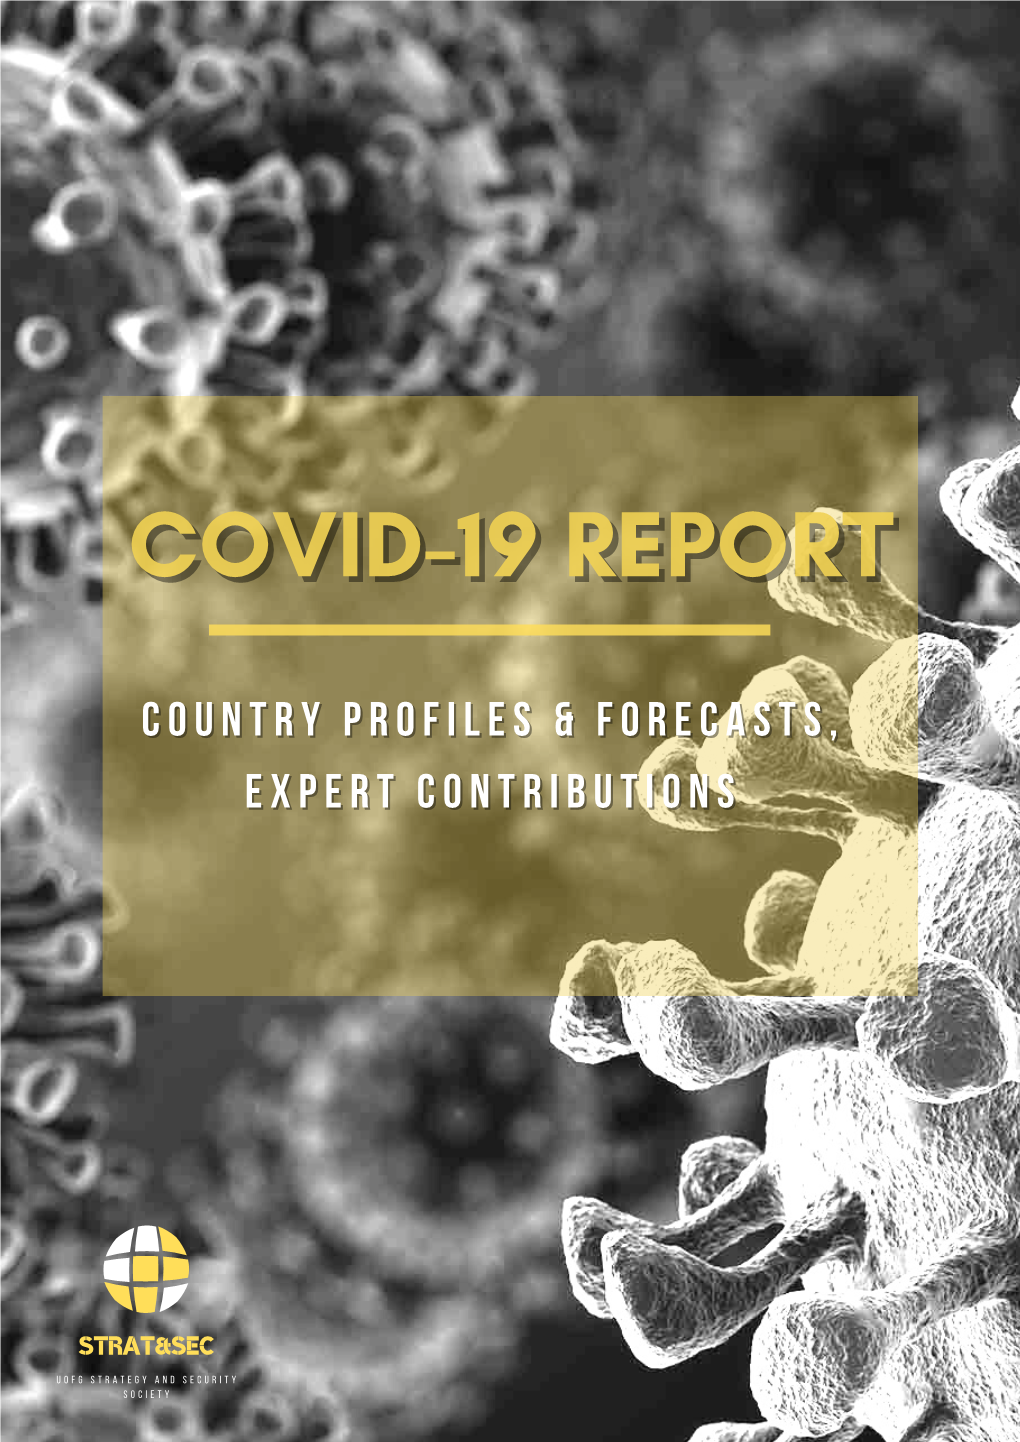 COVID-19 Report: Country Profiles & Forecasts, Expert Contributions